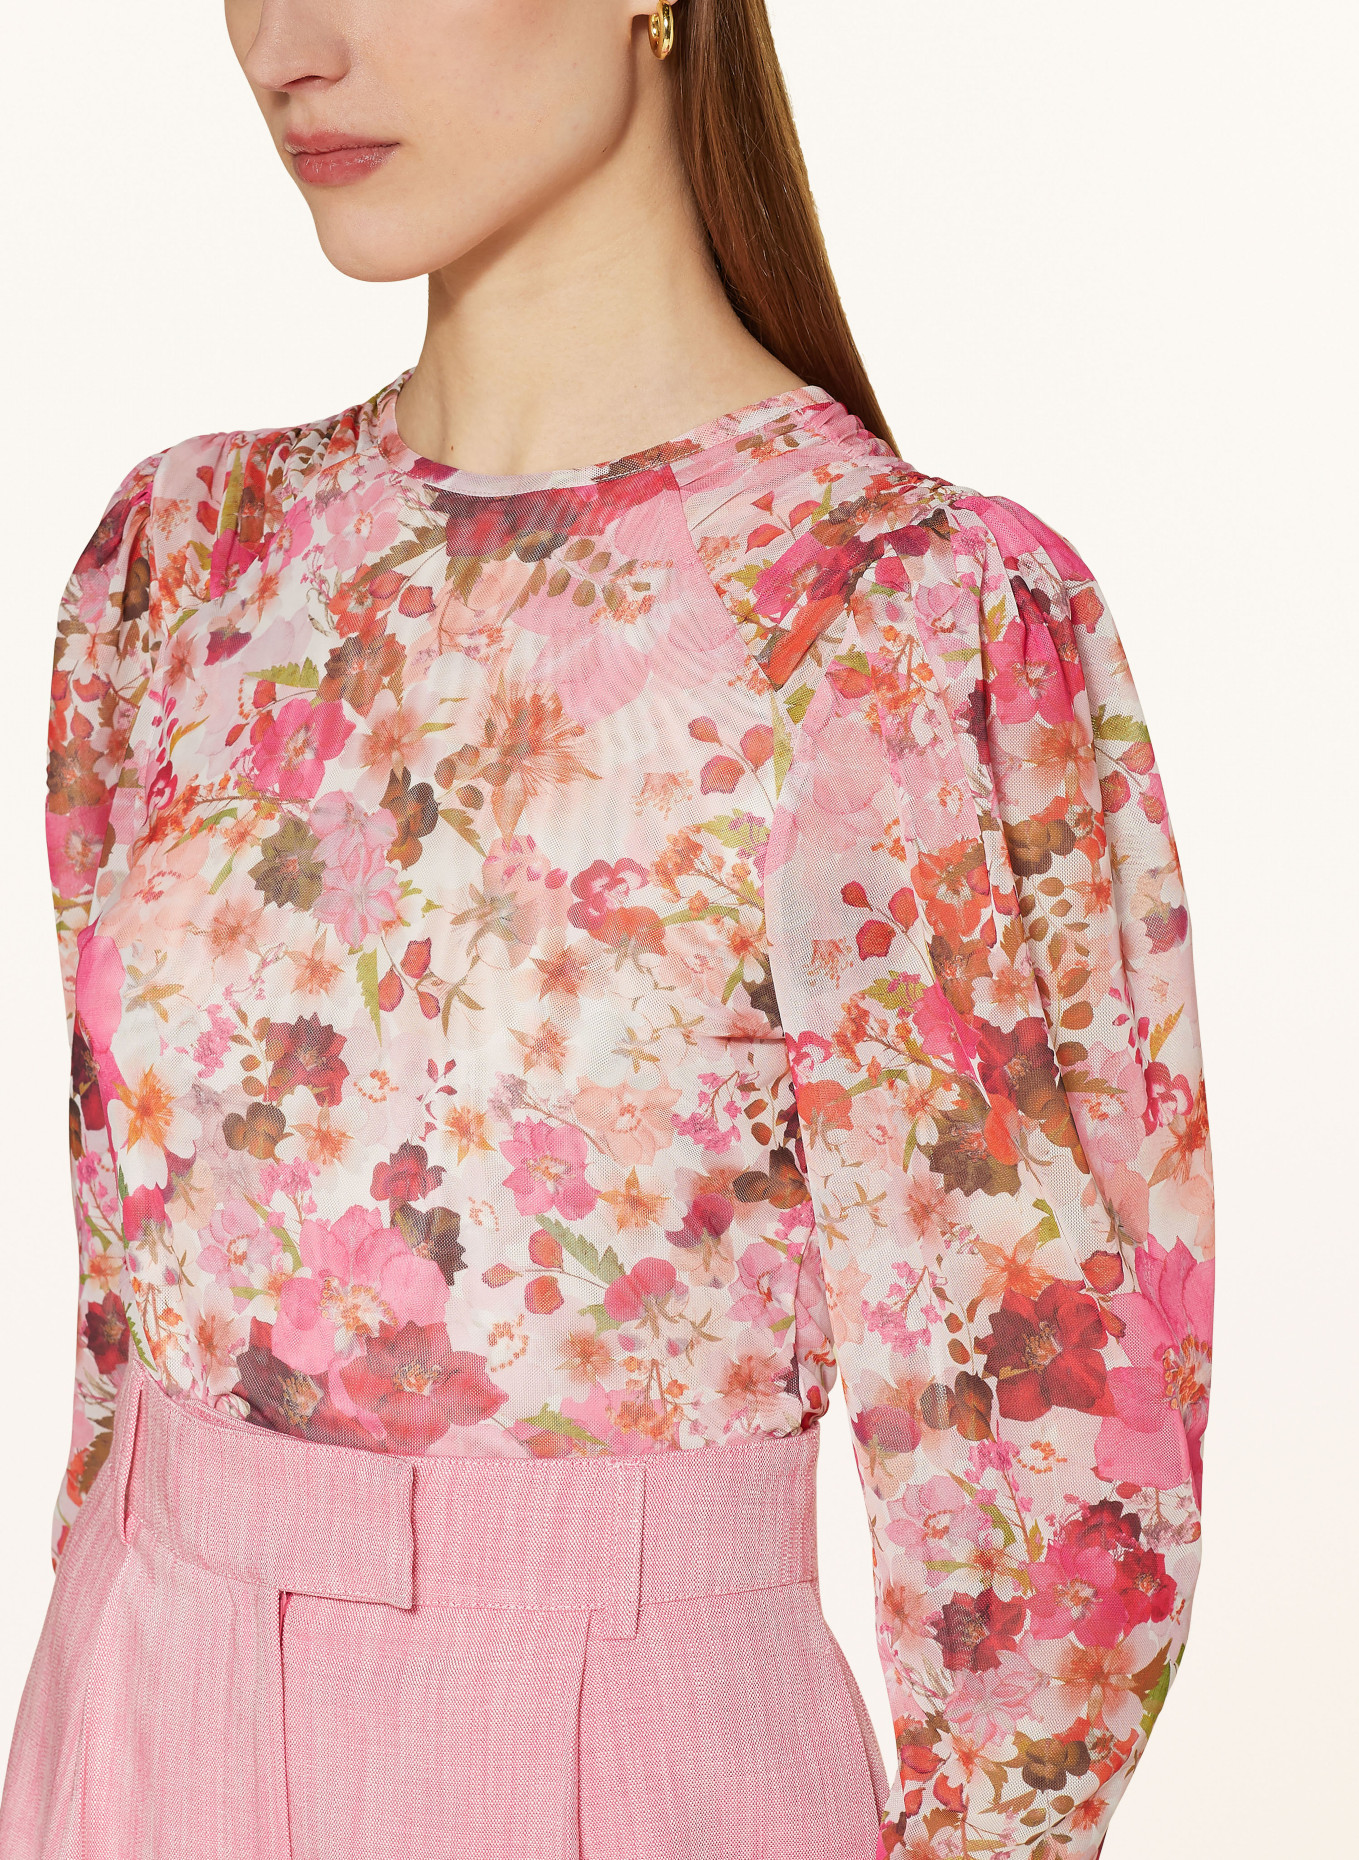 TED BAKER Shirt blouse RAELEY with 3/4 sleeves, Color: CREAM/ PINK/ LIGHT ORANGE (Image 4)